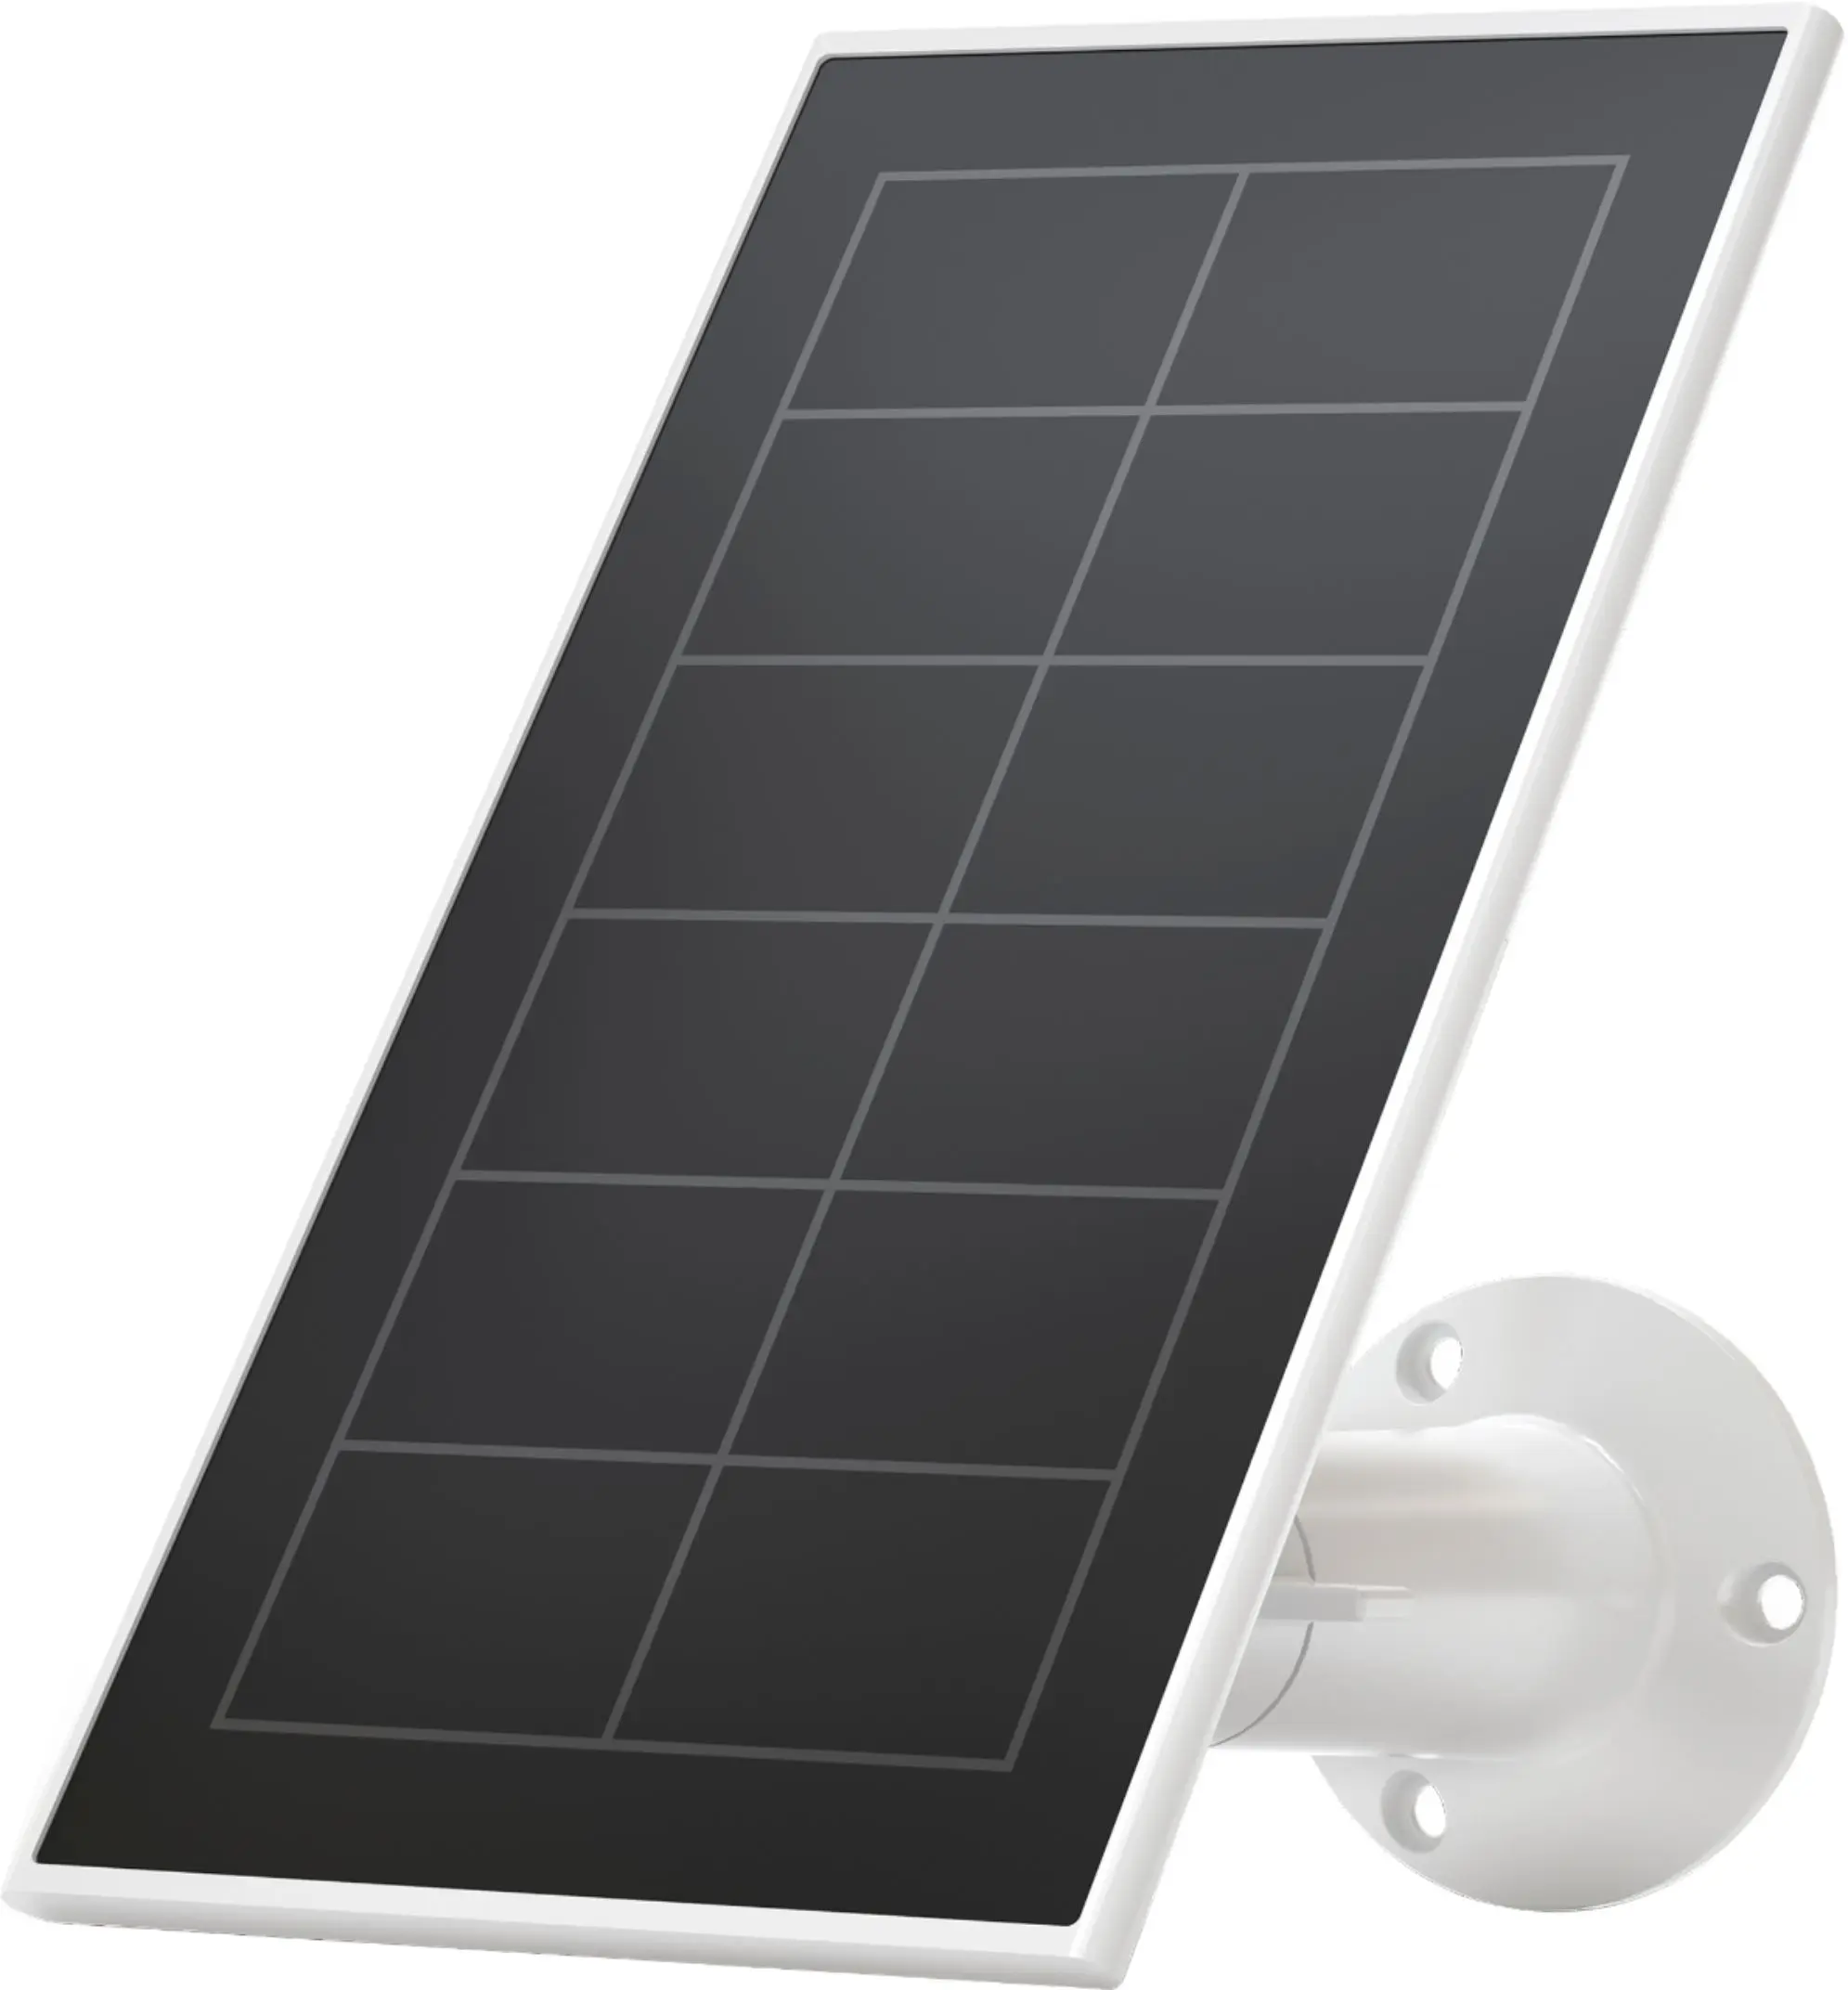 arlo solar panel charger review - How fast does Arlo Solar Panel charge